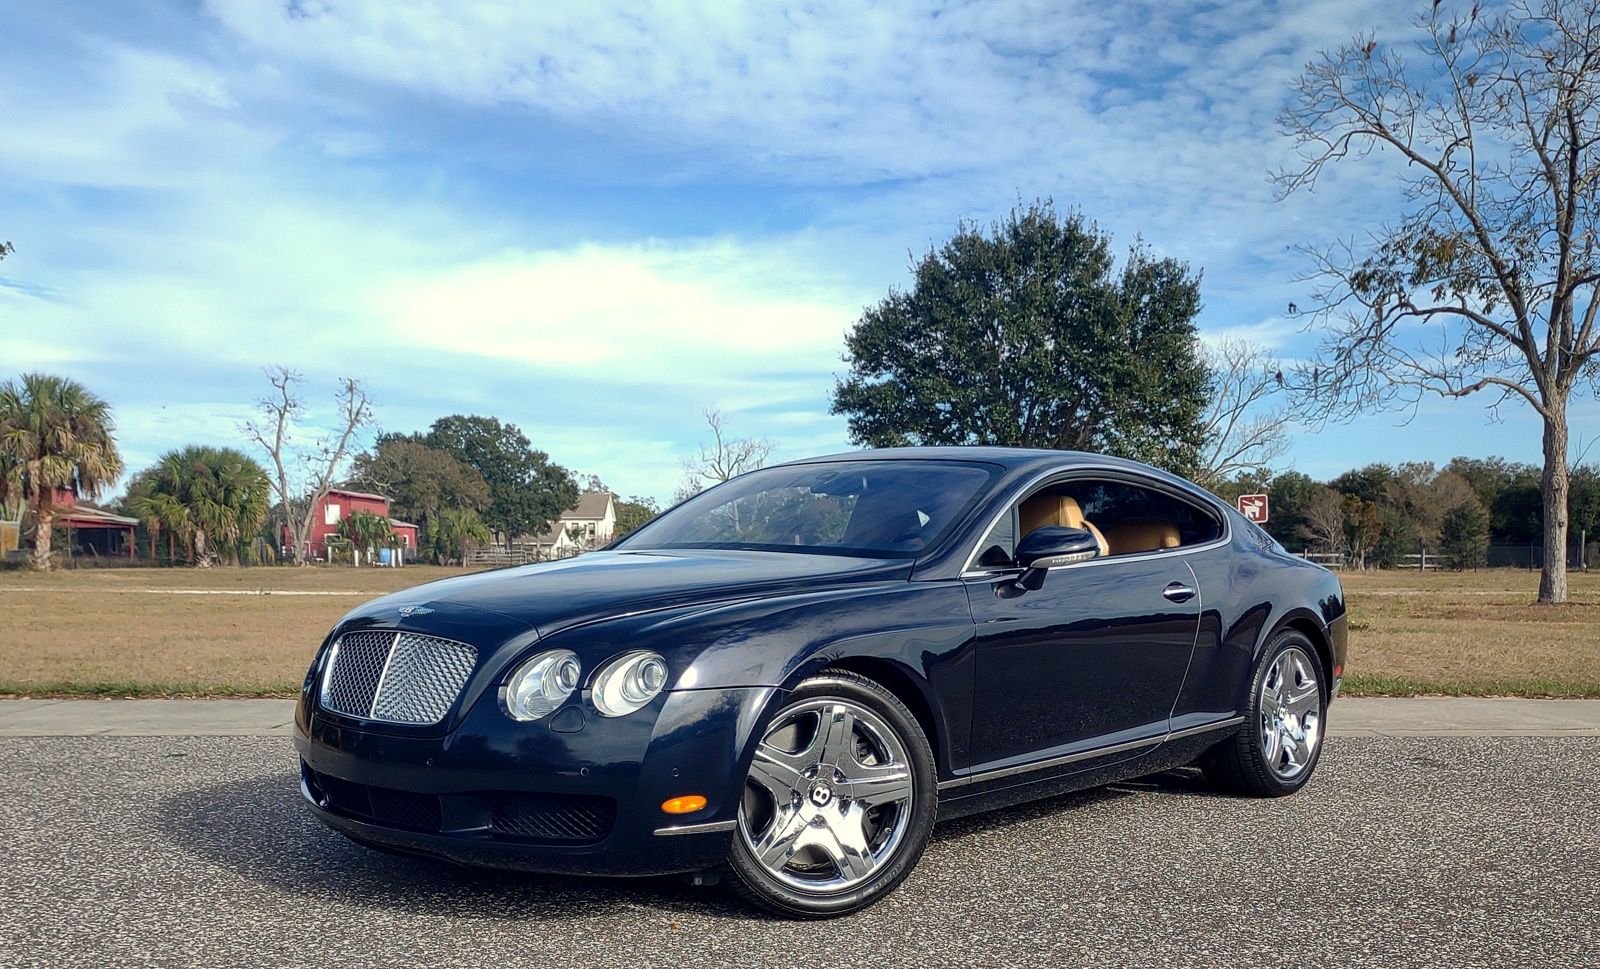 2005 bentley continental 2dr cpe gt